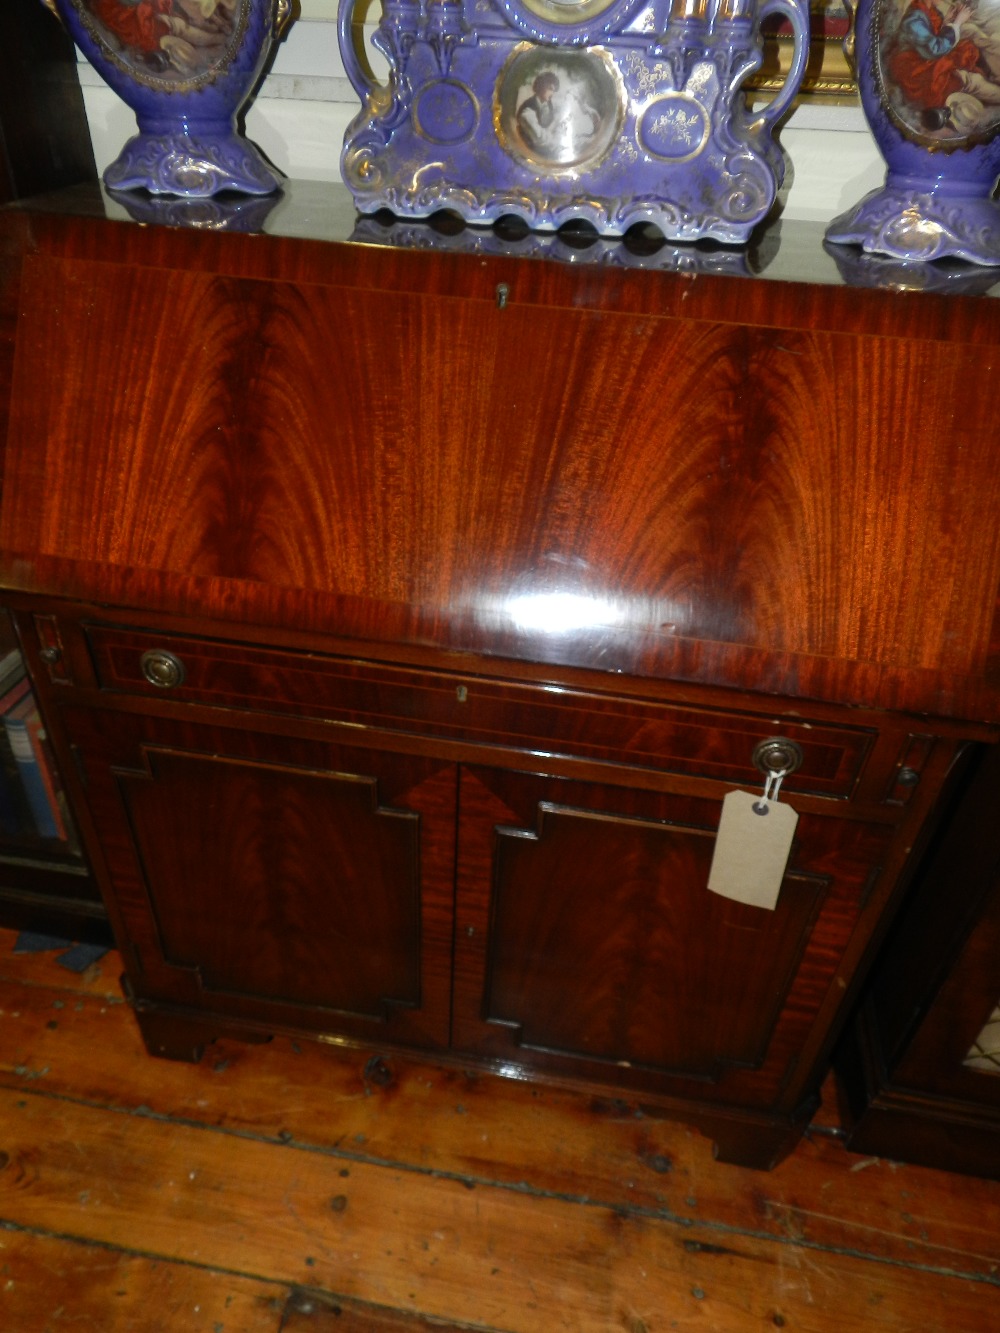 A Regency style mahogany fall front bureau above drawers along with related chair.